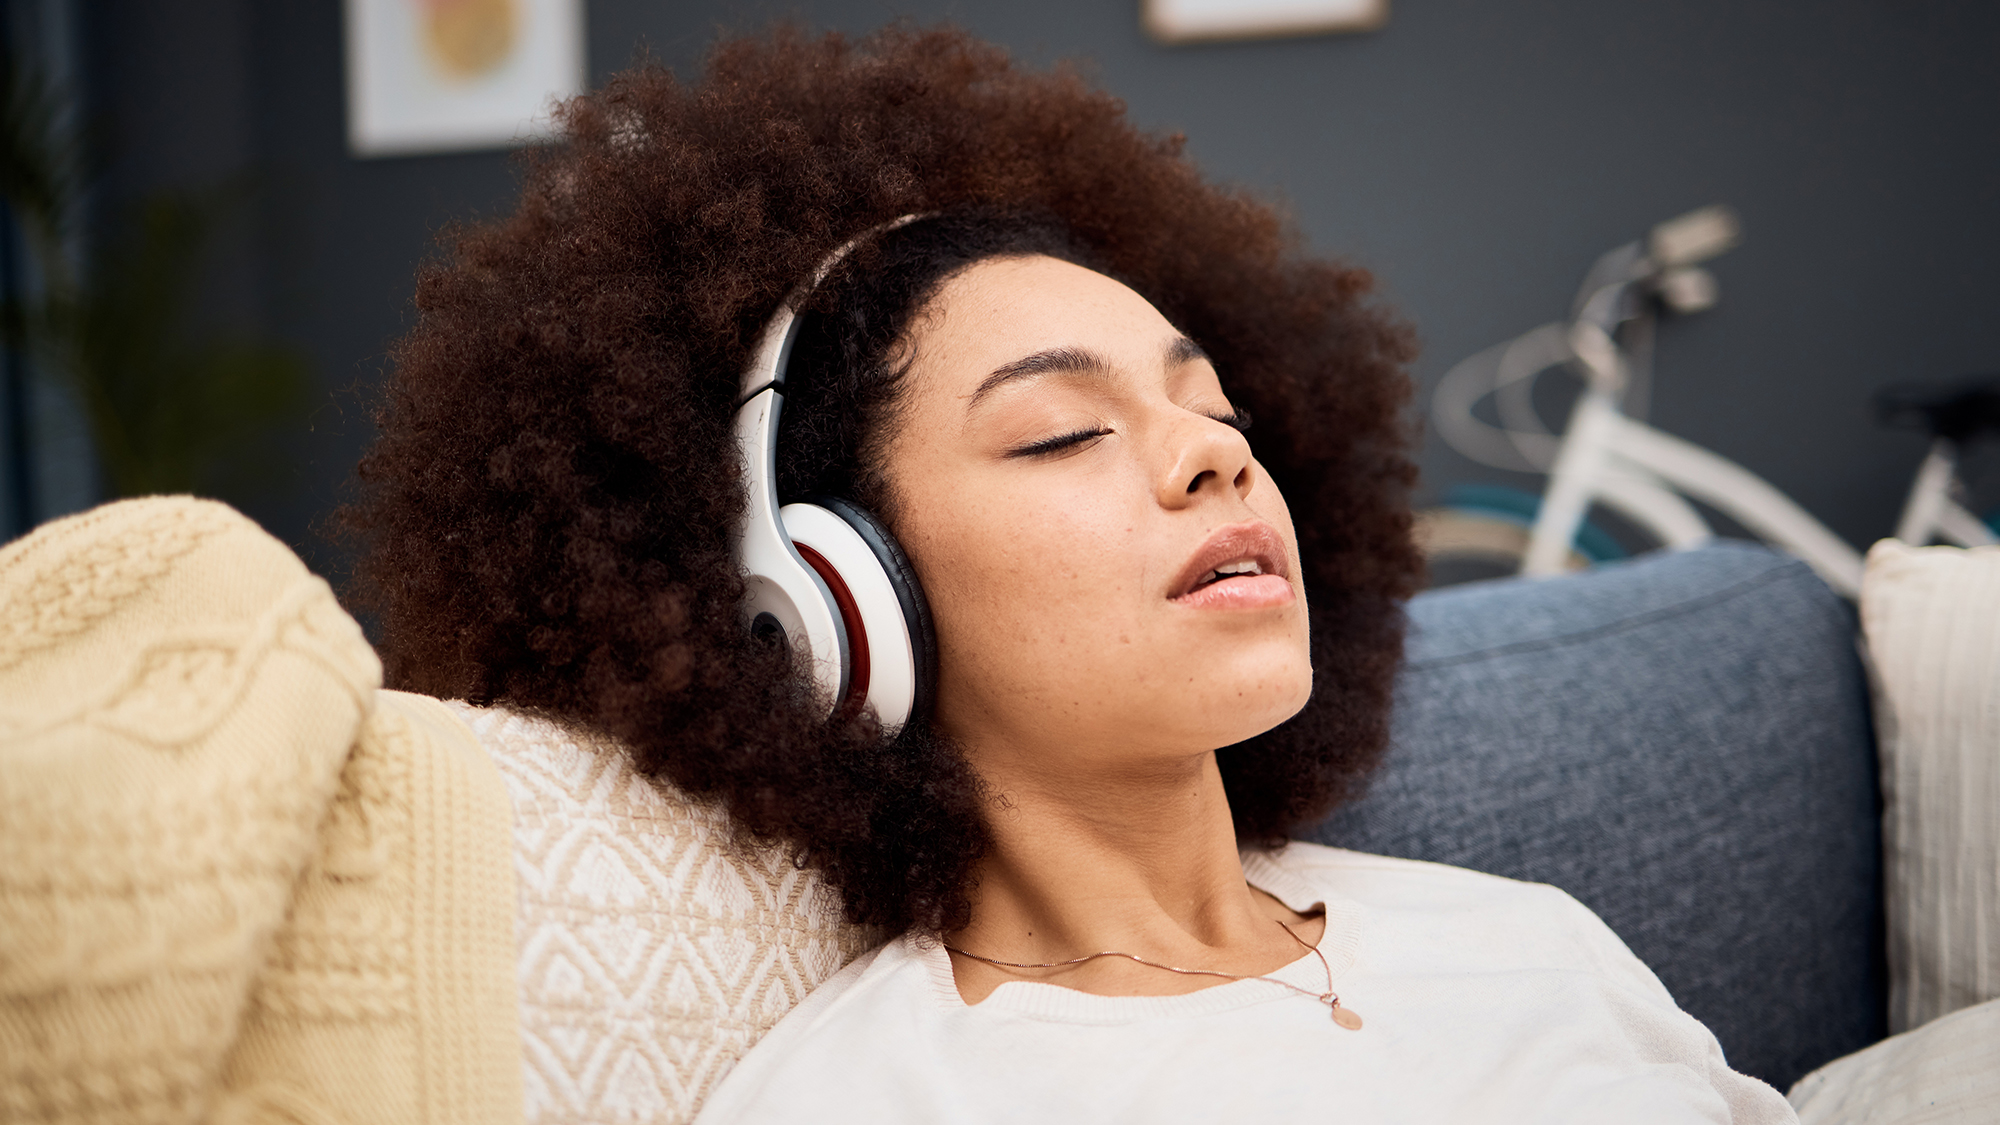 Your favorite, bittersweet tunes may help relieve pain better than unfamiliar, relaxing music